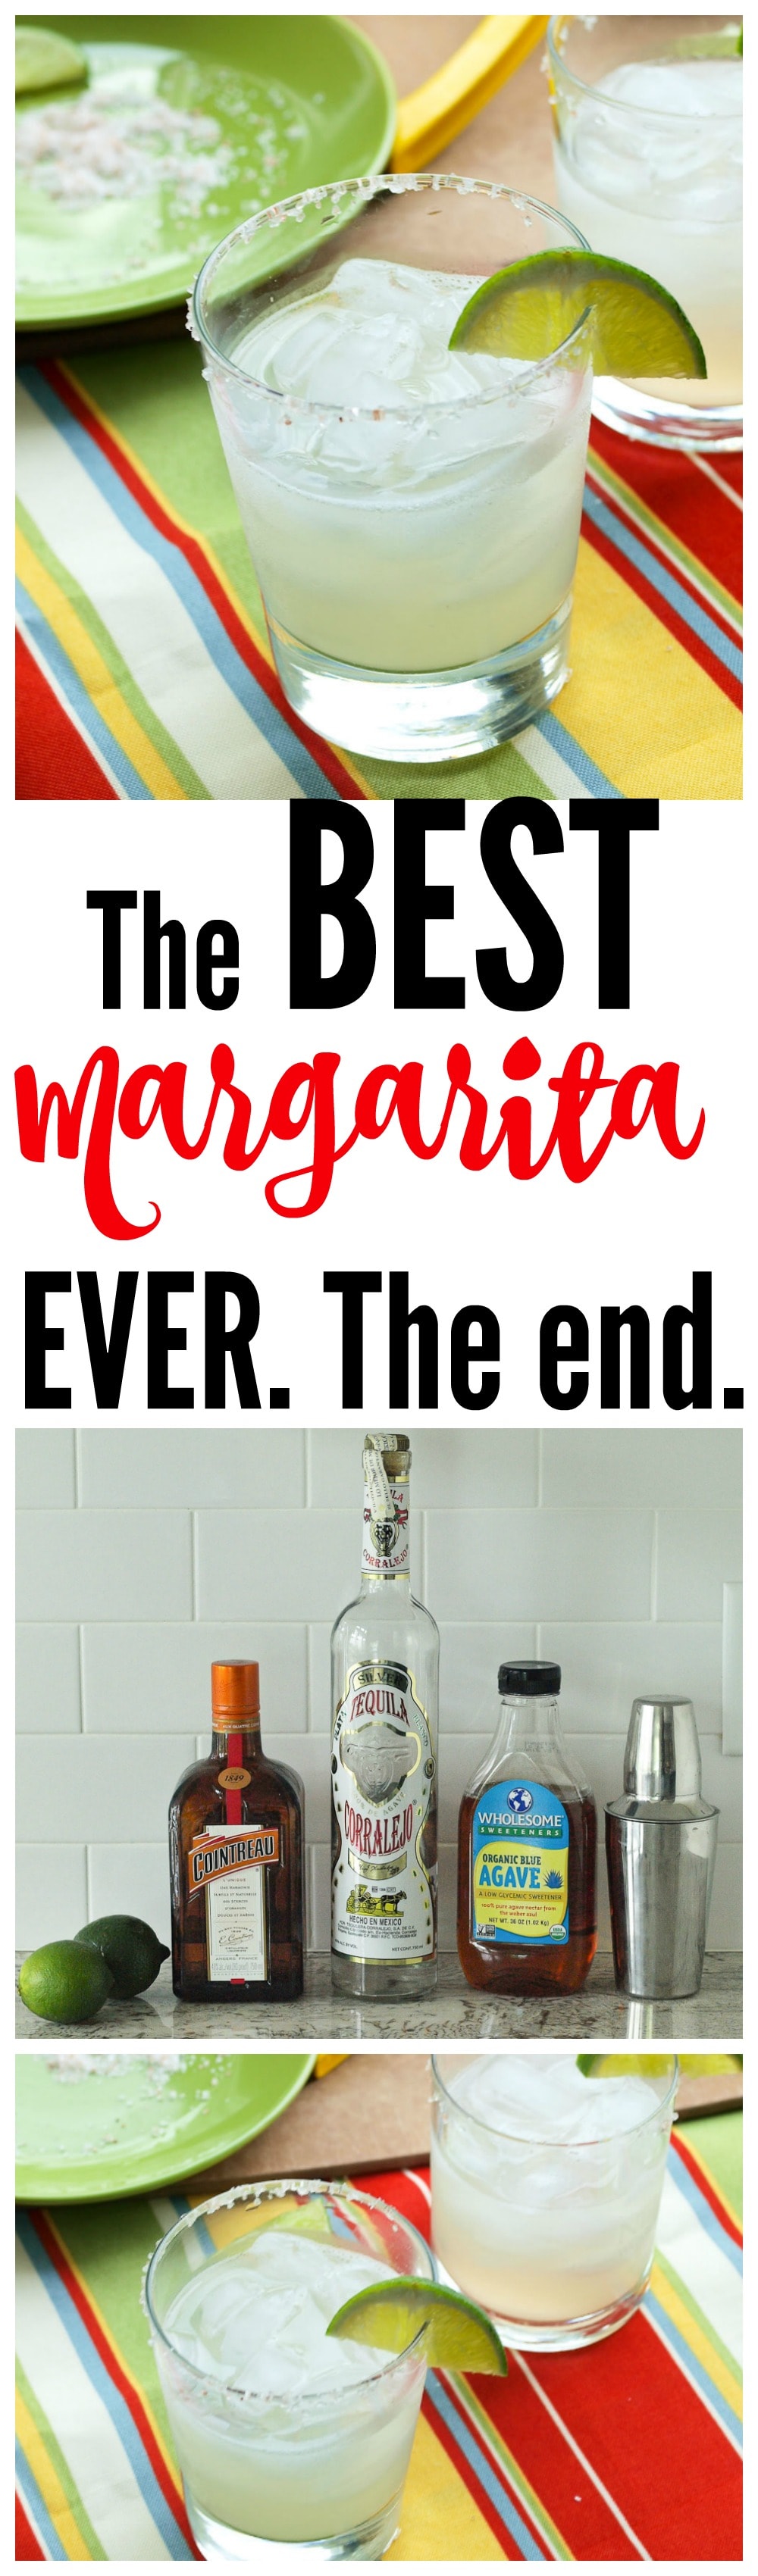 What are some good margarita recipes?